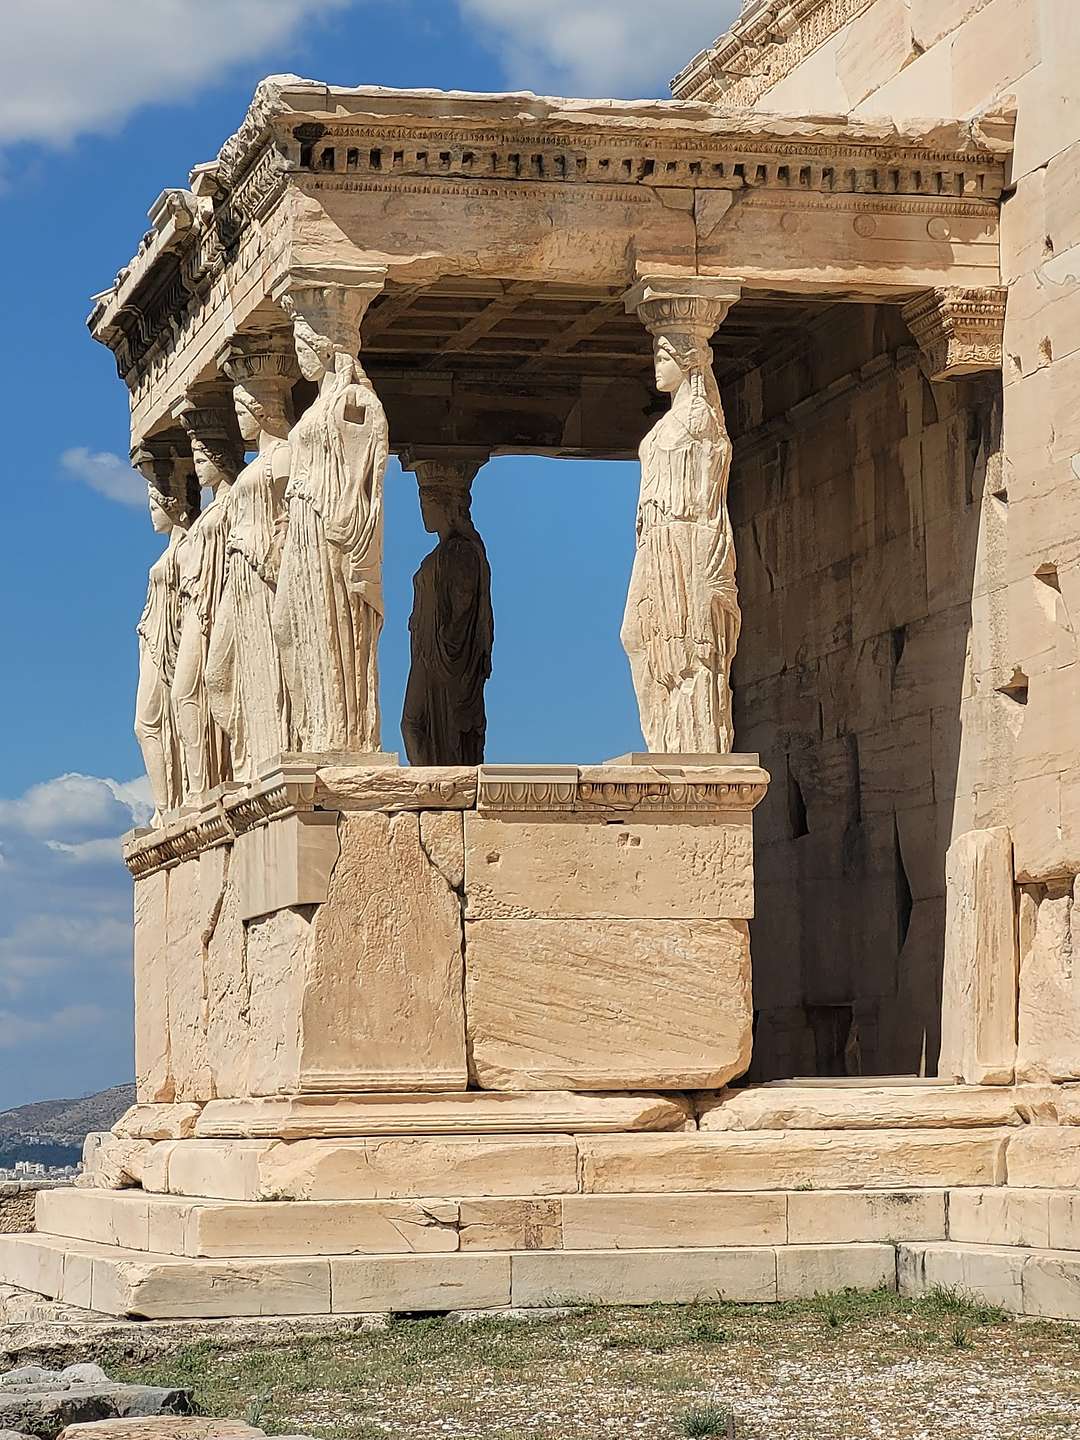 Porch of the Caryatids